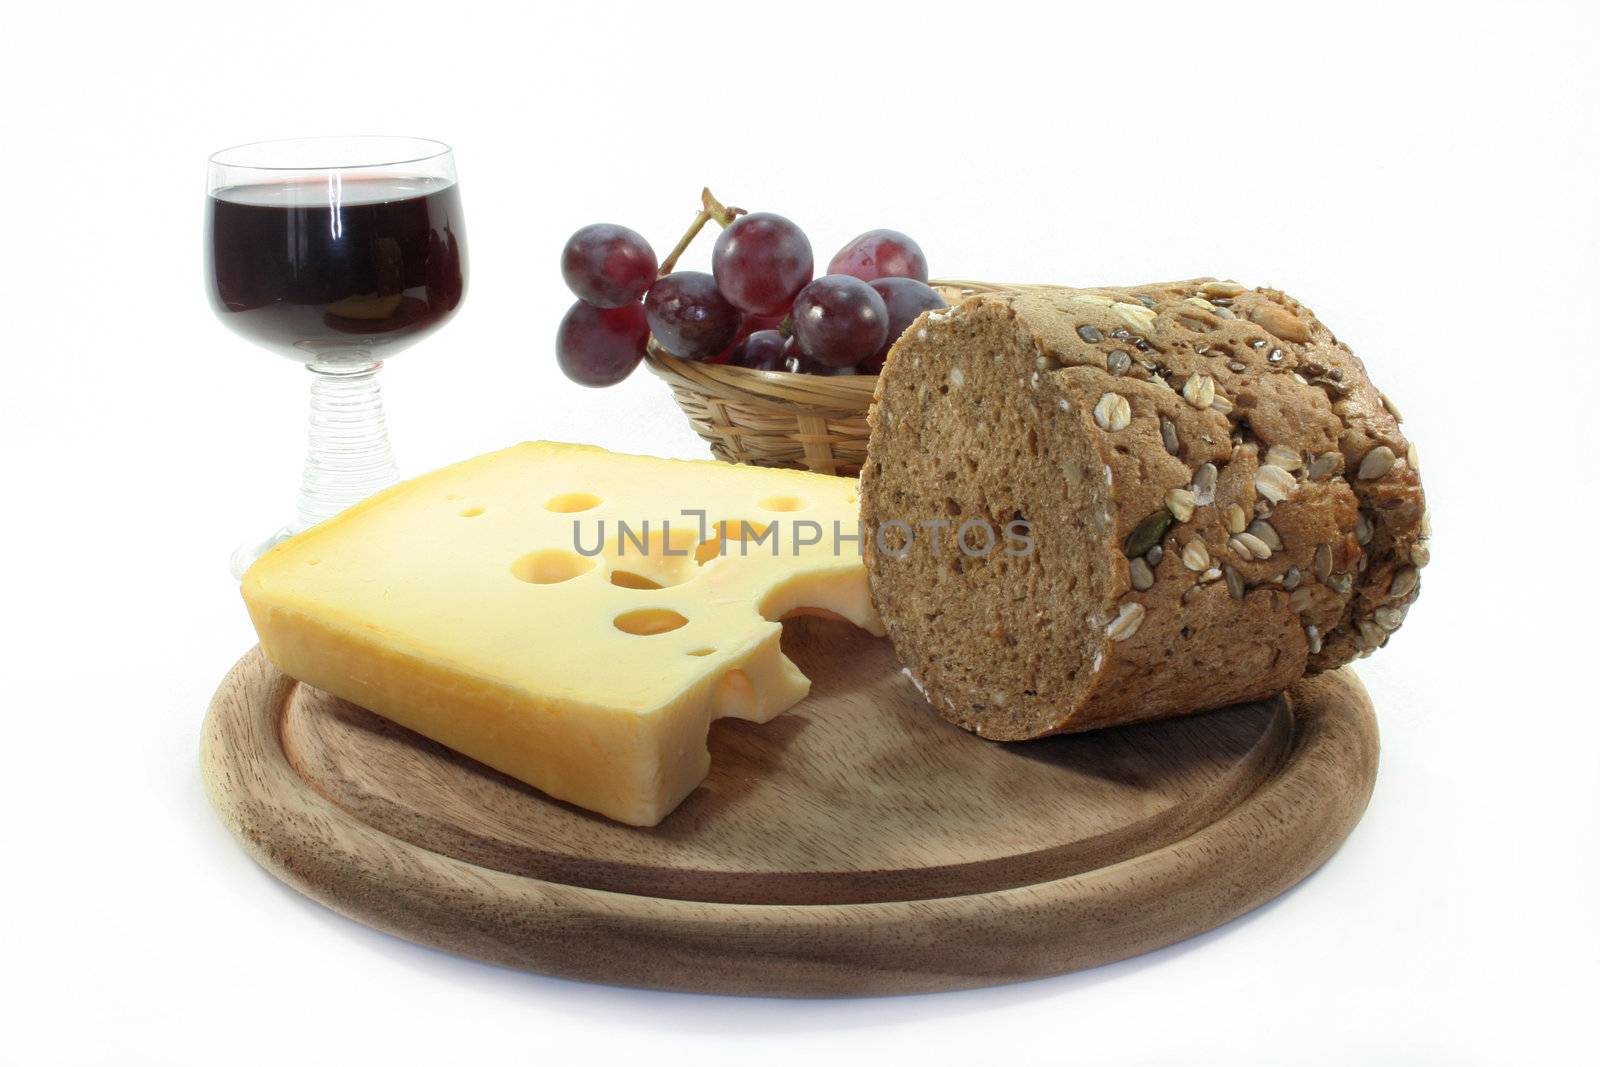 a piece of cheese and bread on a board and other goodies